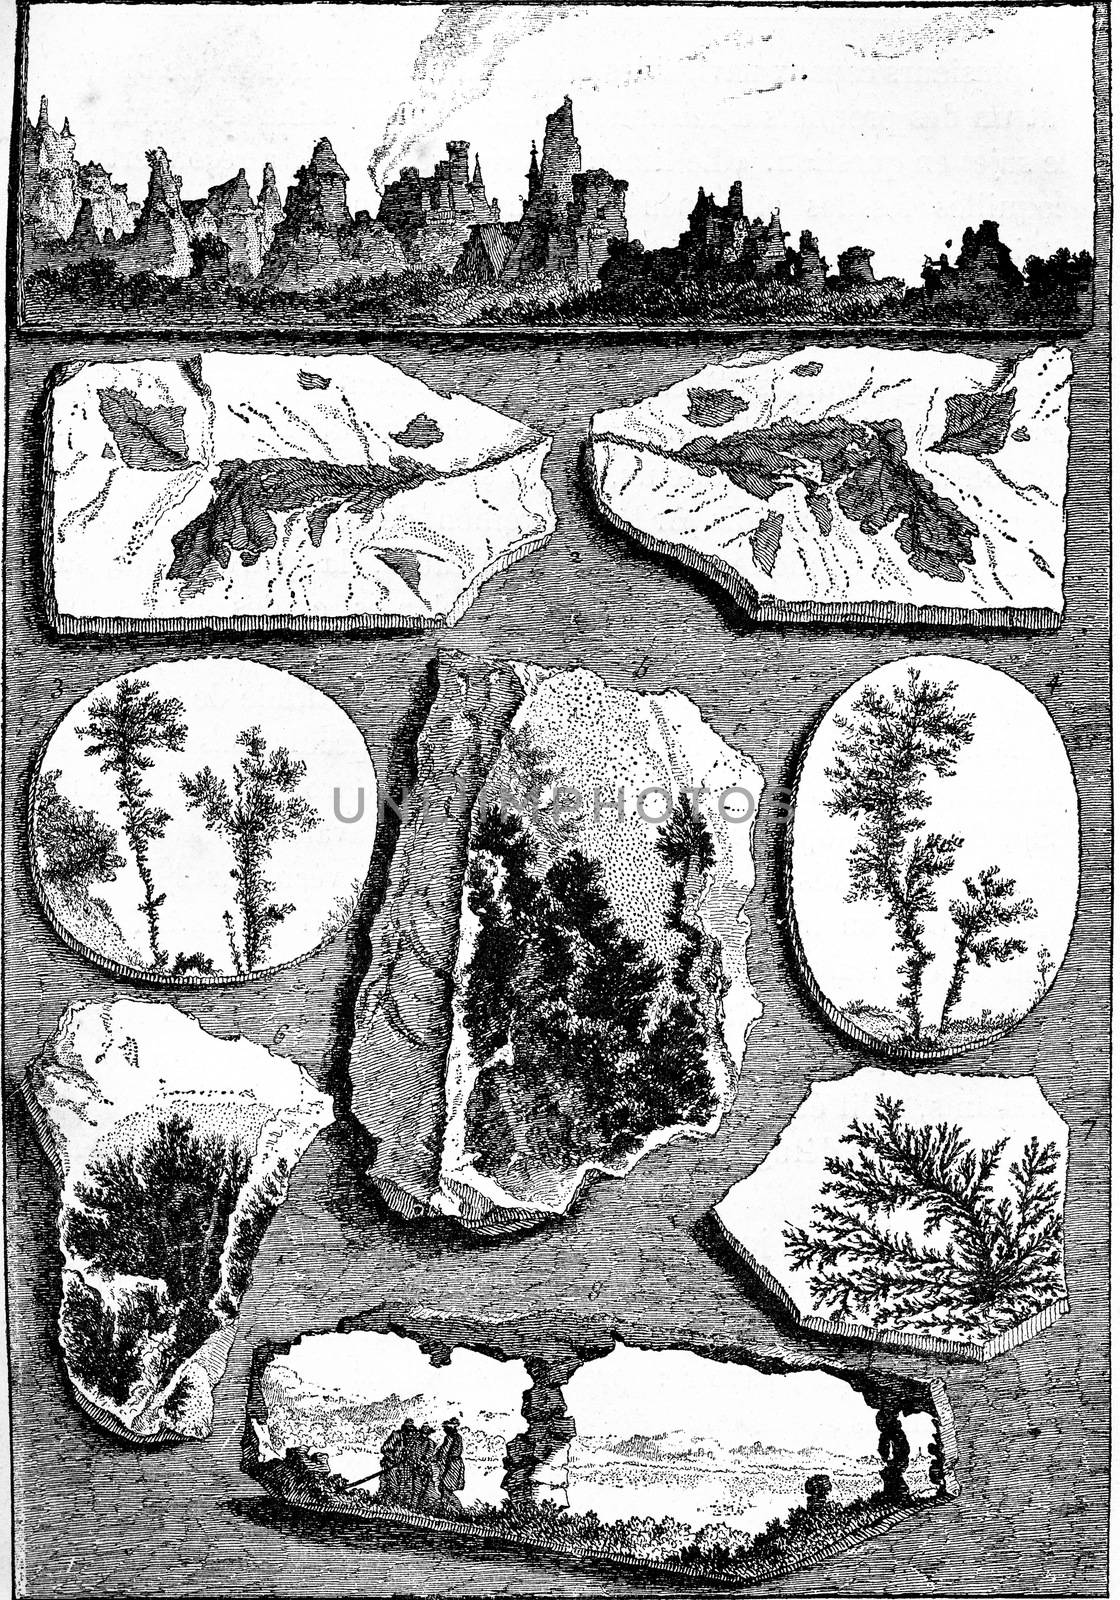 Arborise curious stones, vintage engraved illustration. Earth before man – 1886.
